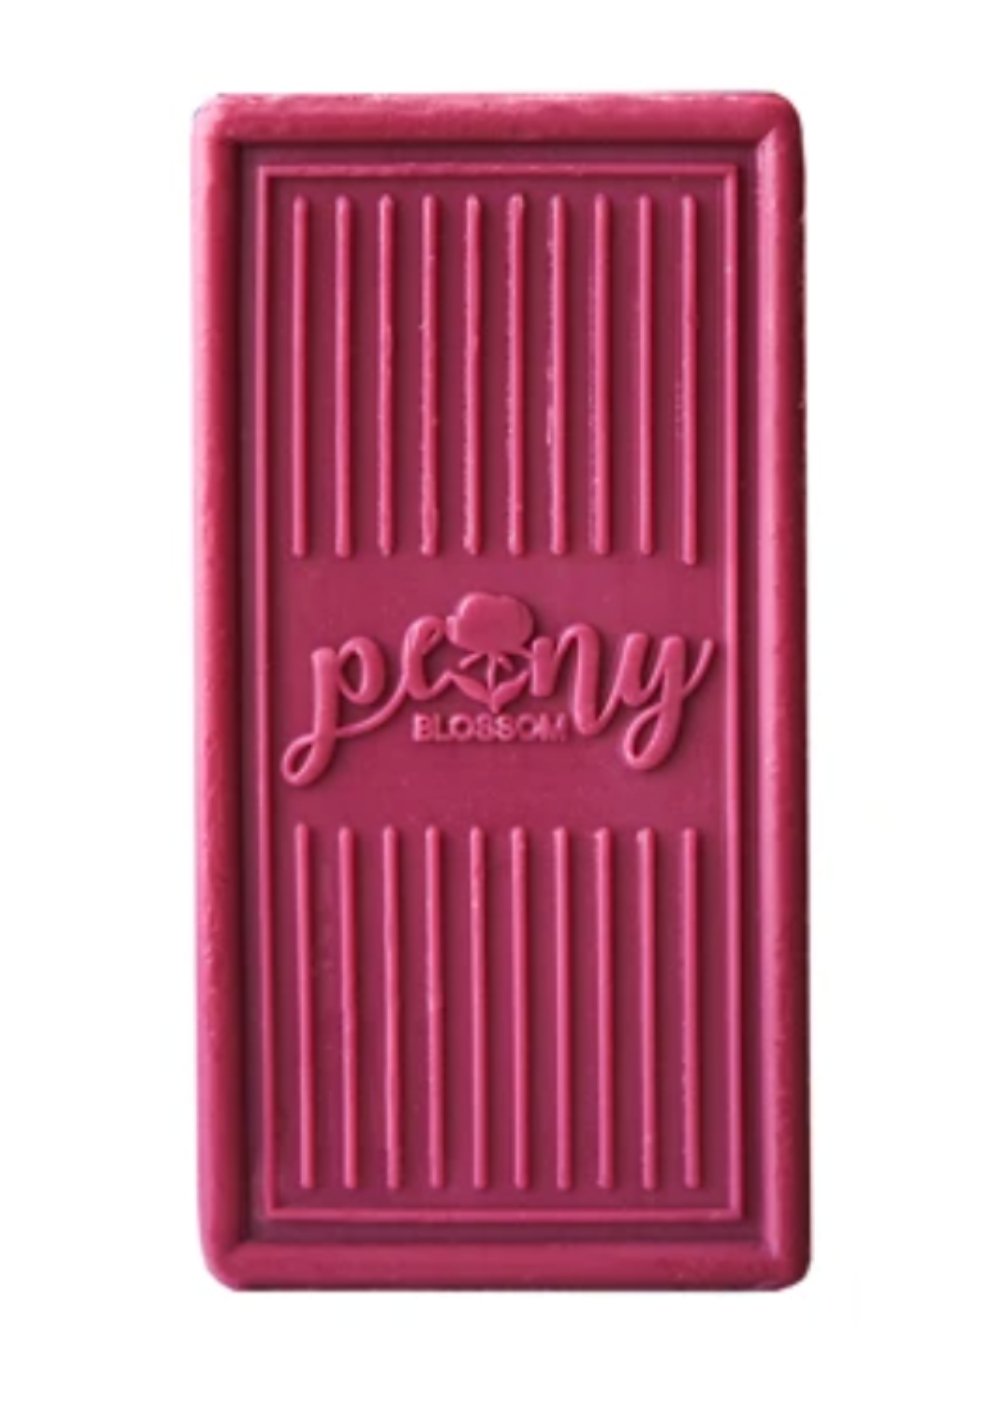 MOR Peony Blossom Boxed Triple-Milled Soap 180g - The Face Method